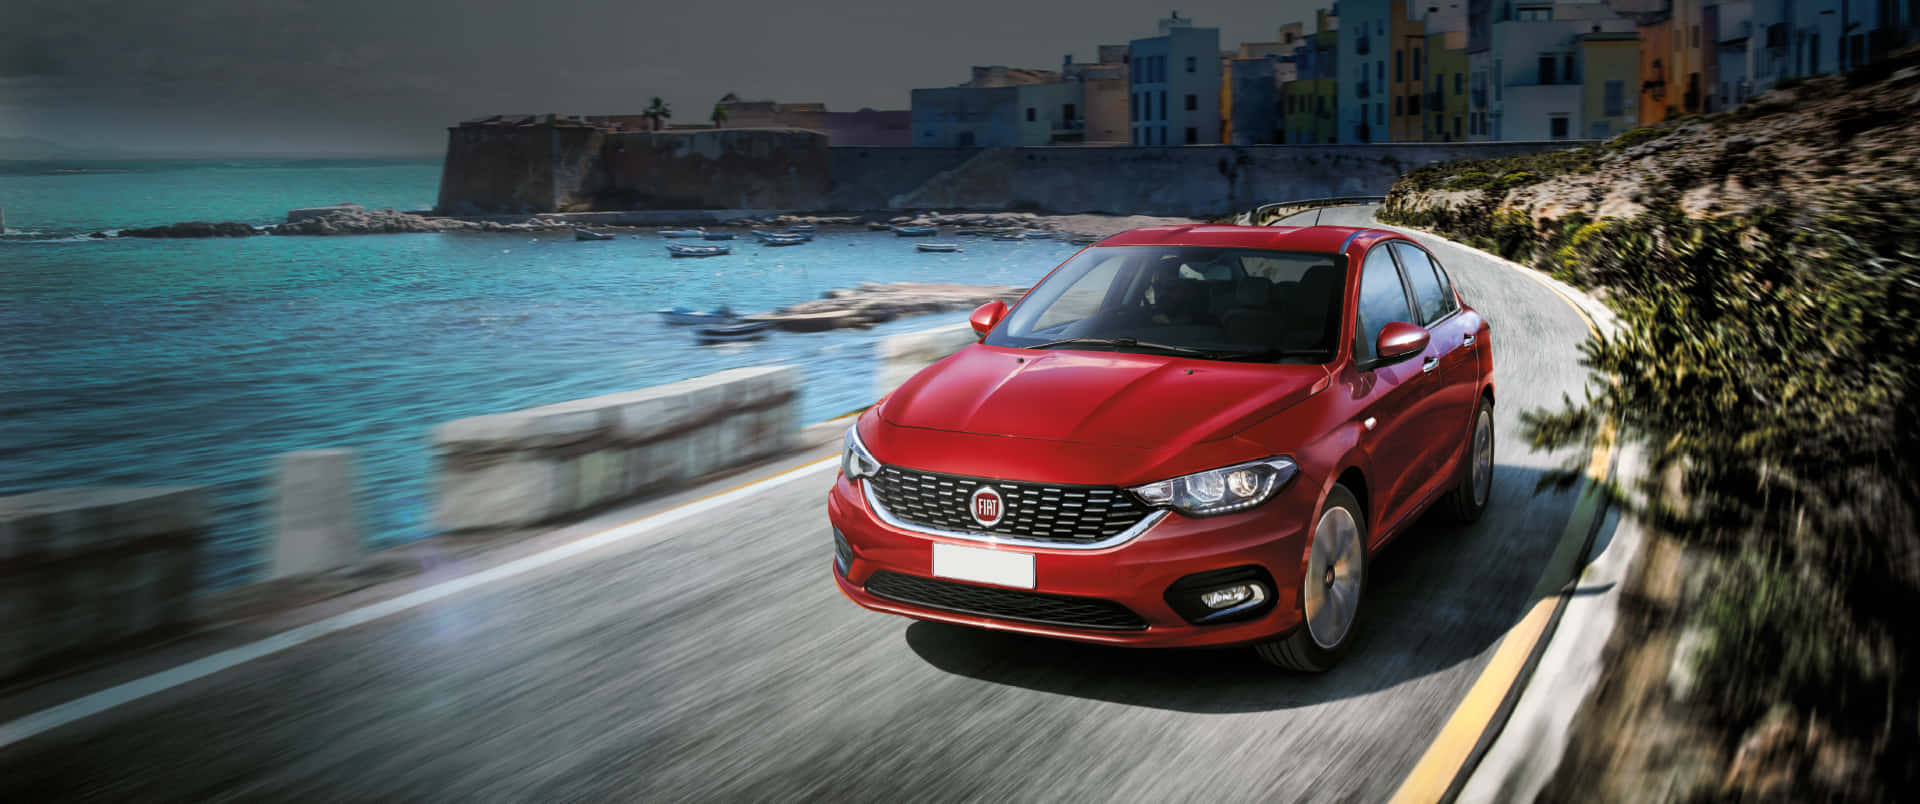 Fiat Tipo in Motion Wallpaper